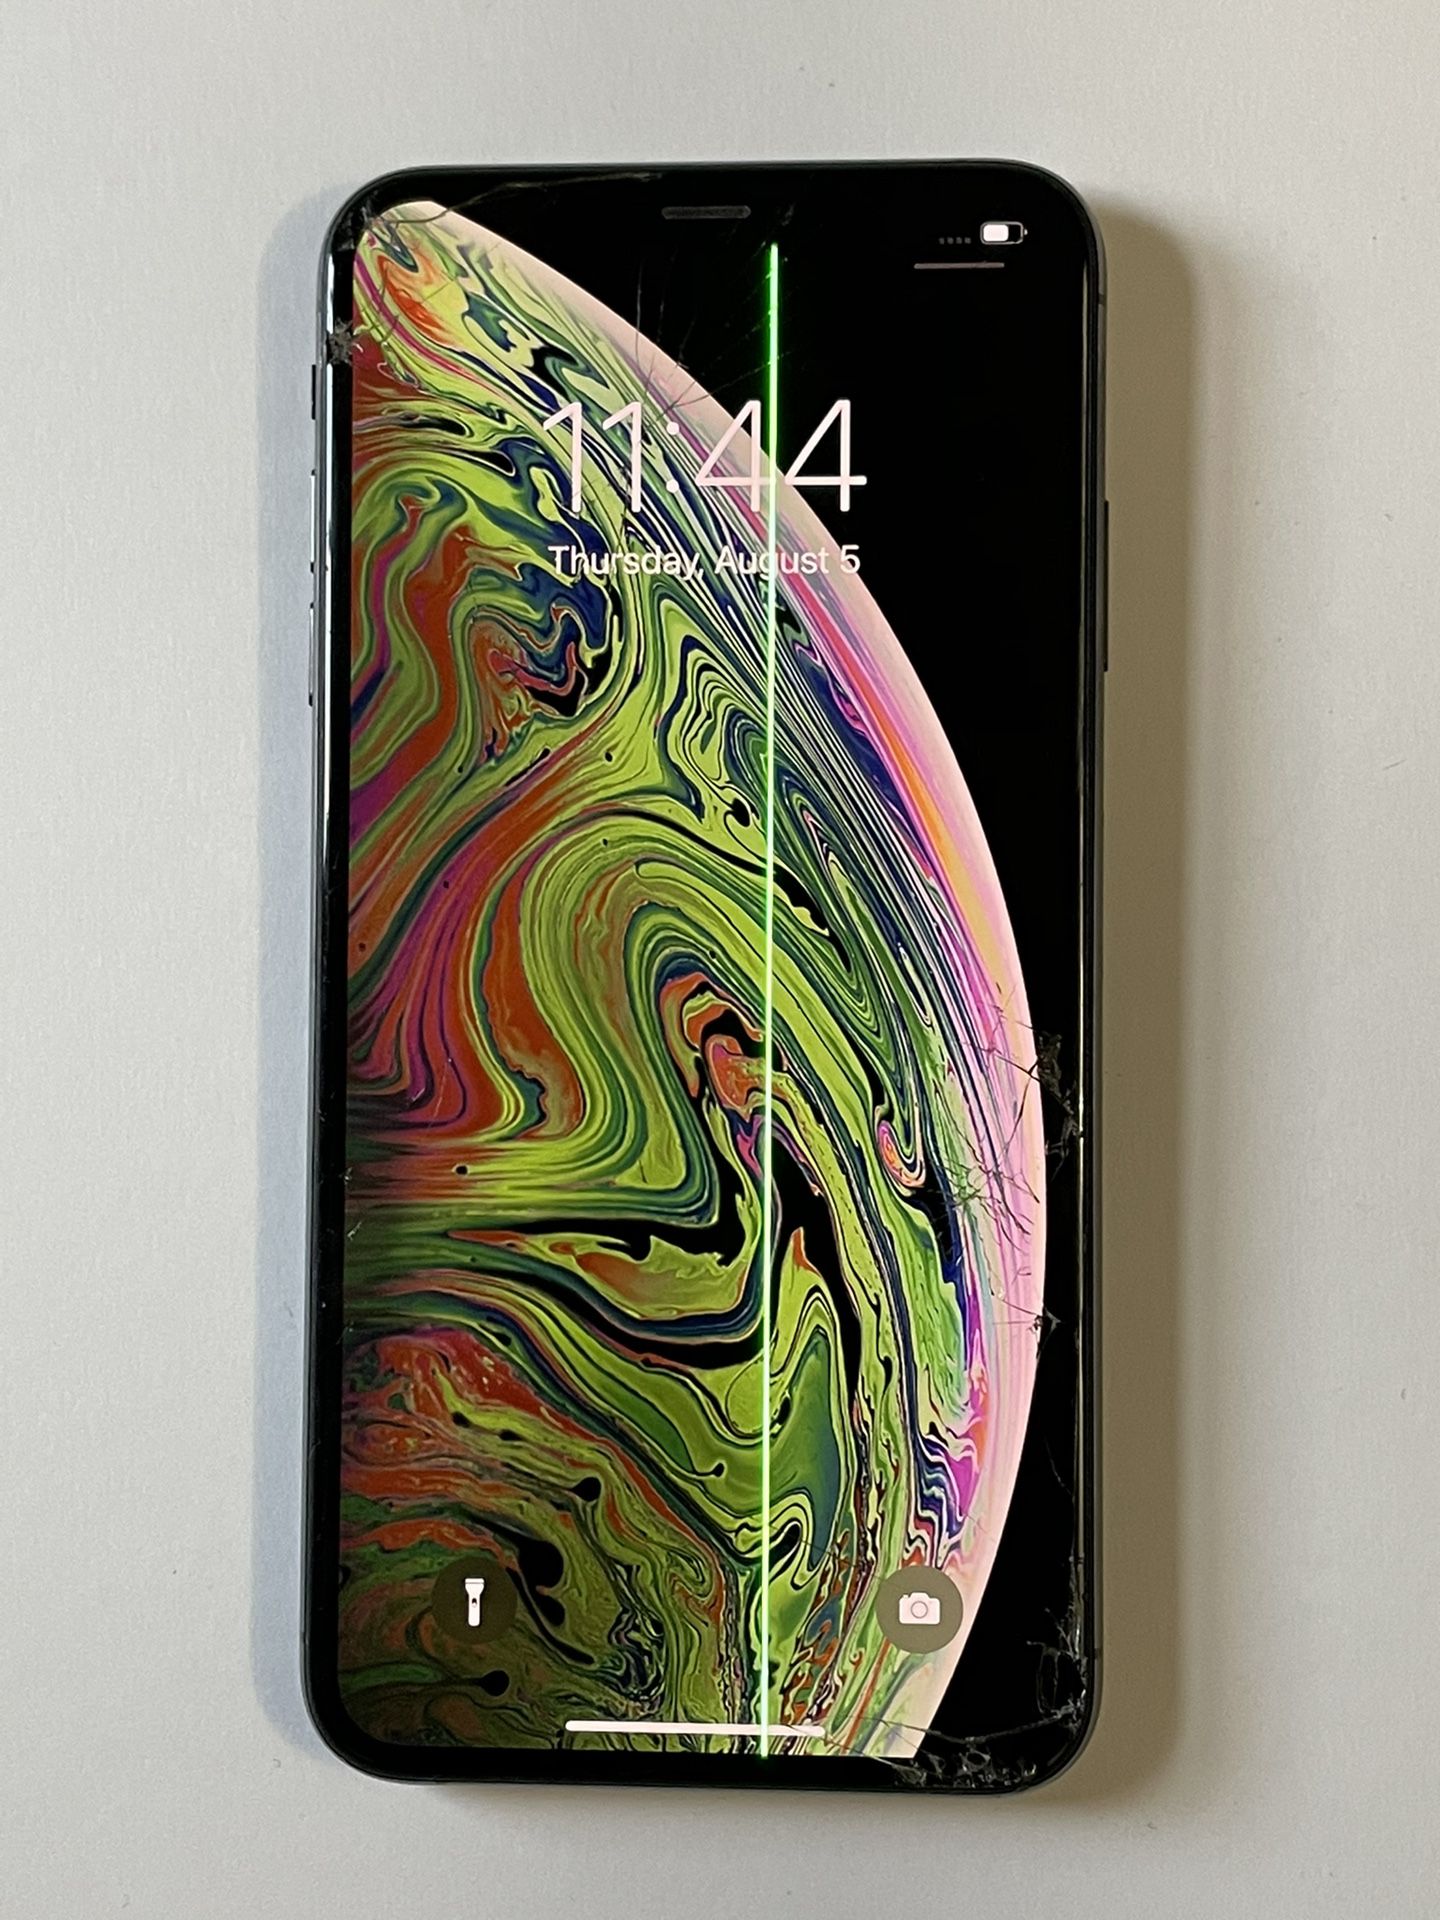 iPhone Xs Max 256 Gb - Unlocked - Cracked Screen And Back.  Works - Sold As-Is Pickup 